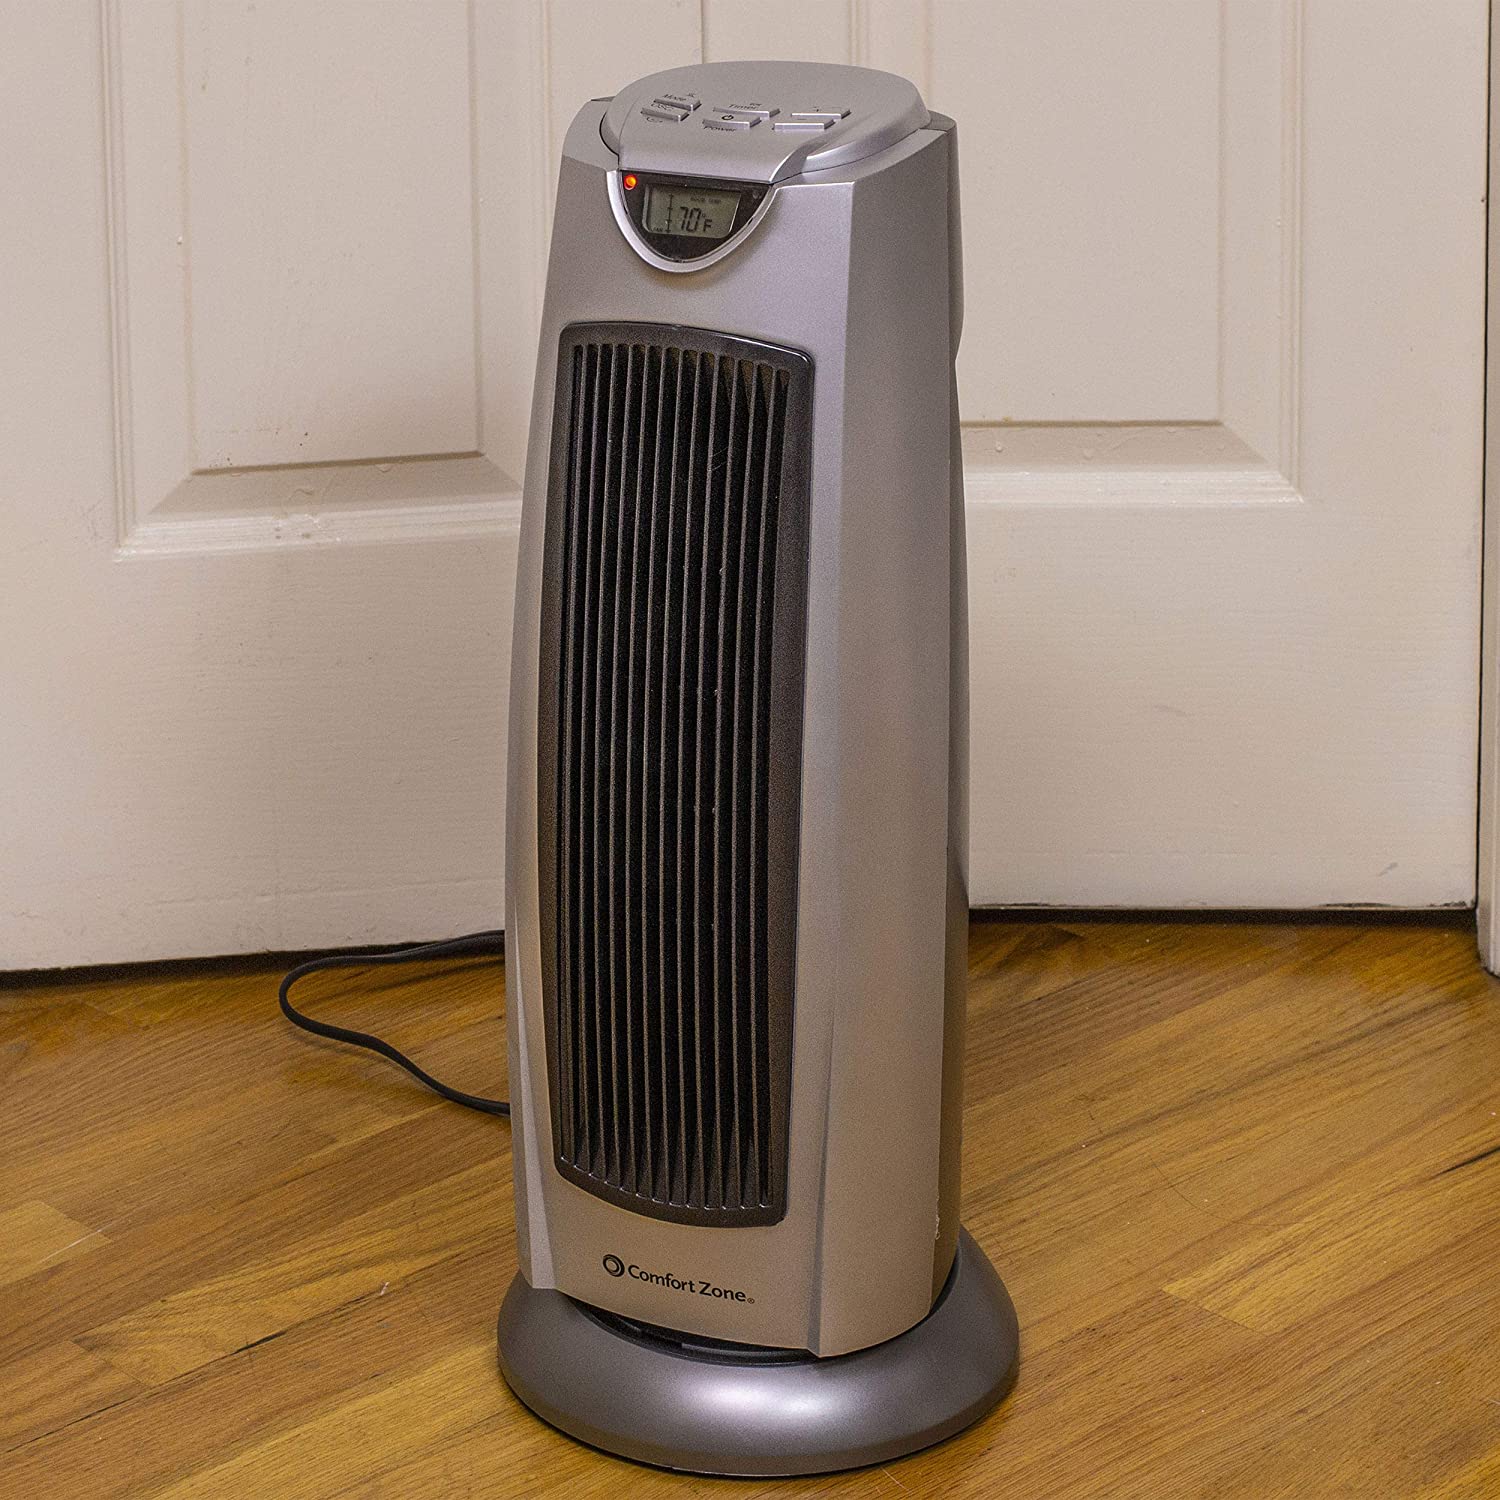 comfort zone heater keeps turning off